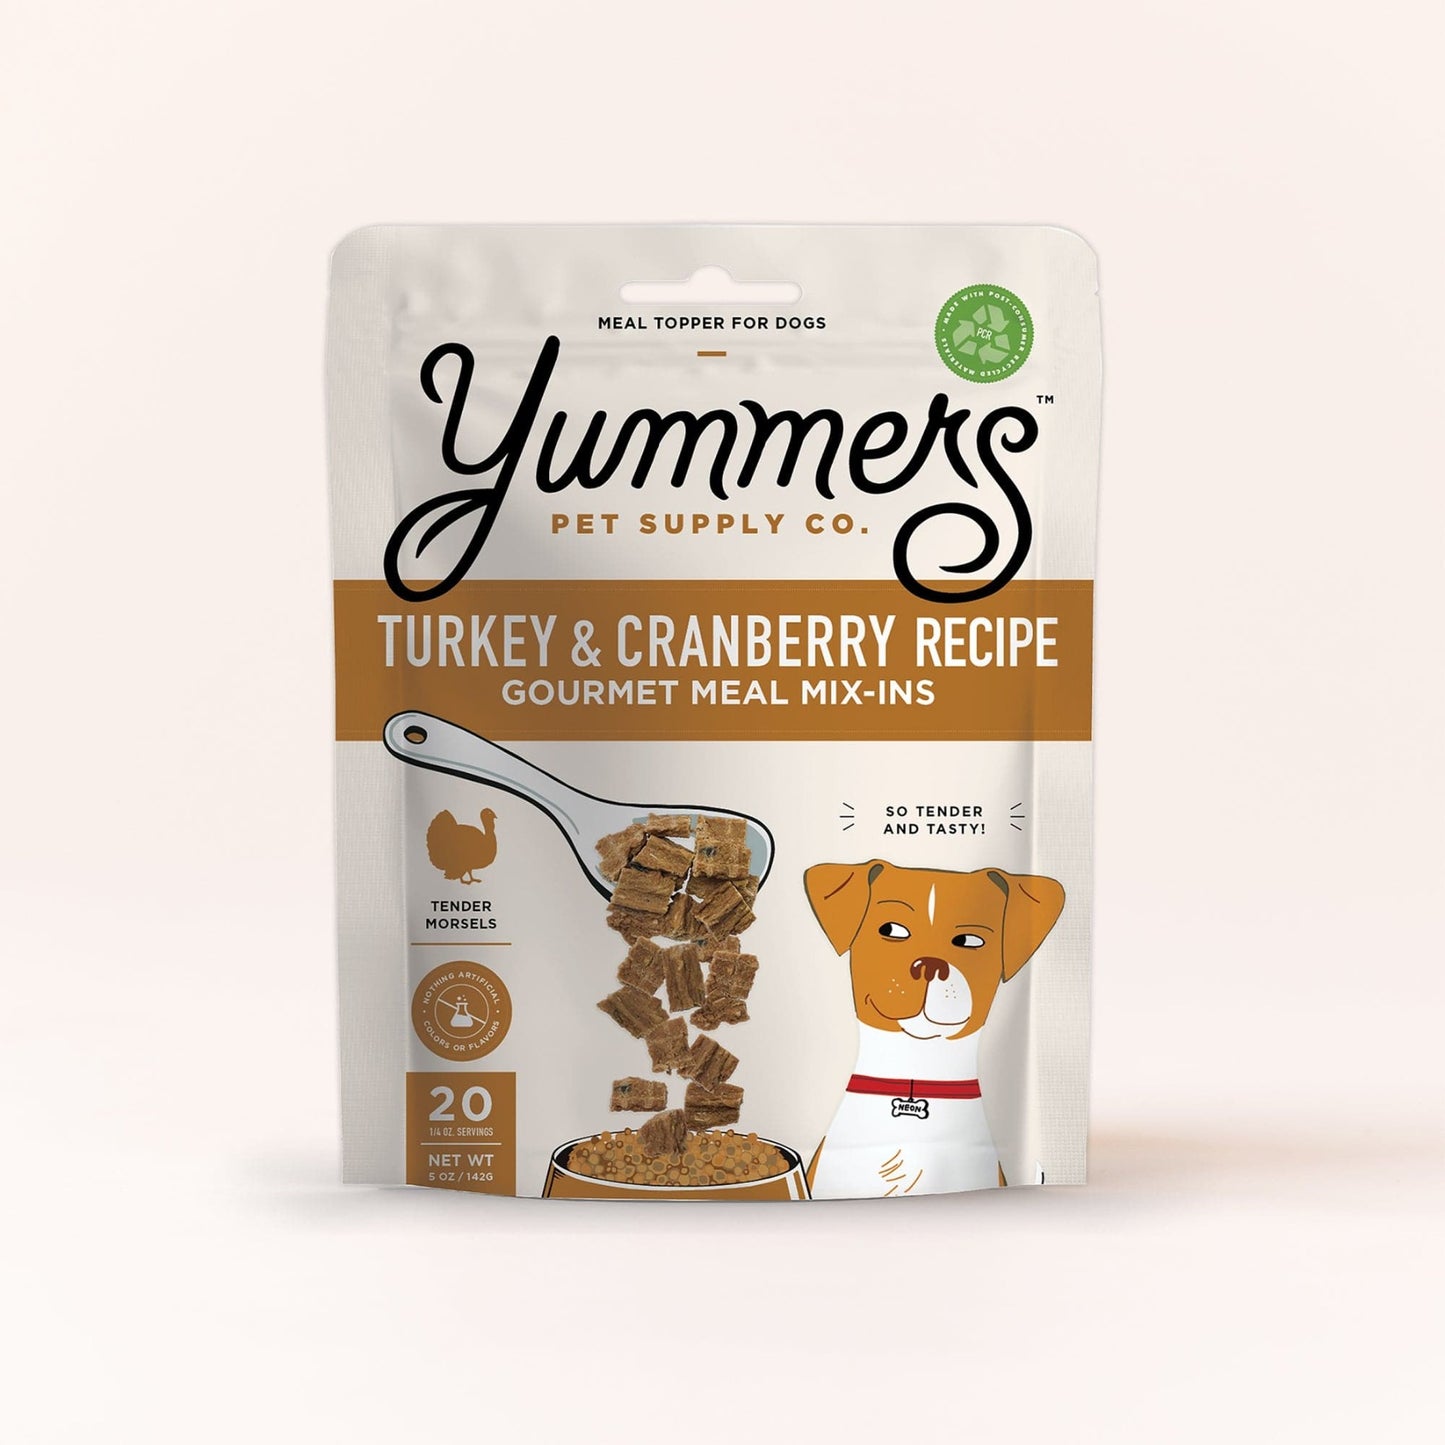 Yummers Turkey & Cranberry Meal Mix-Ins